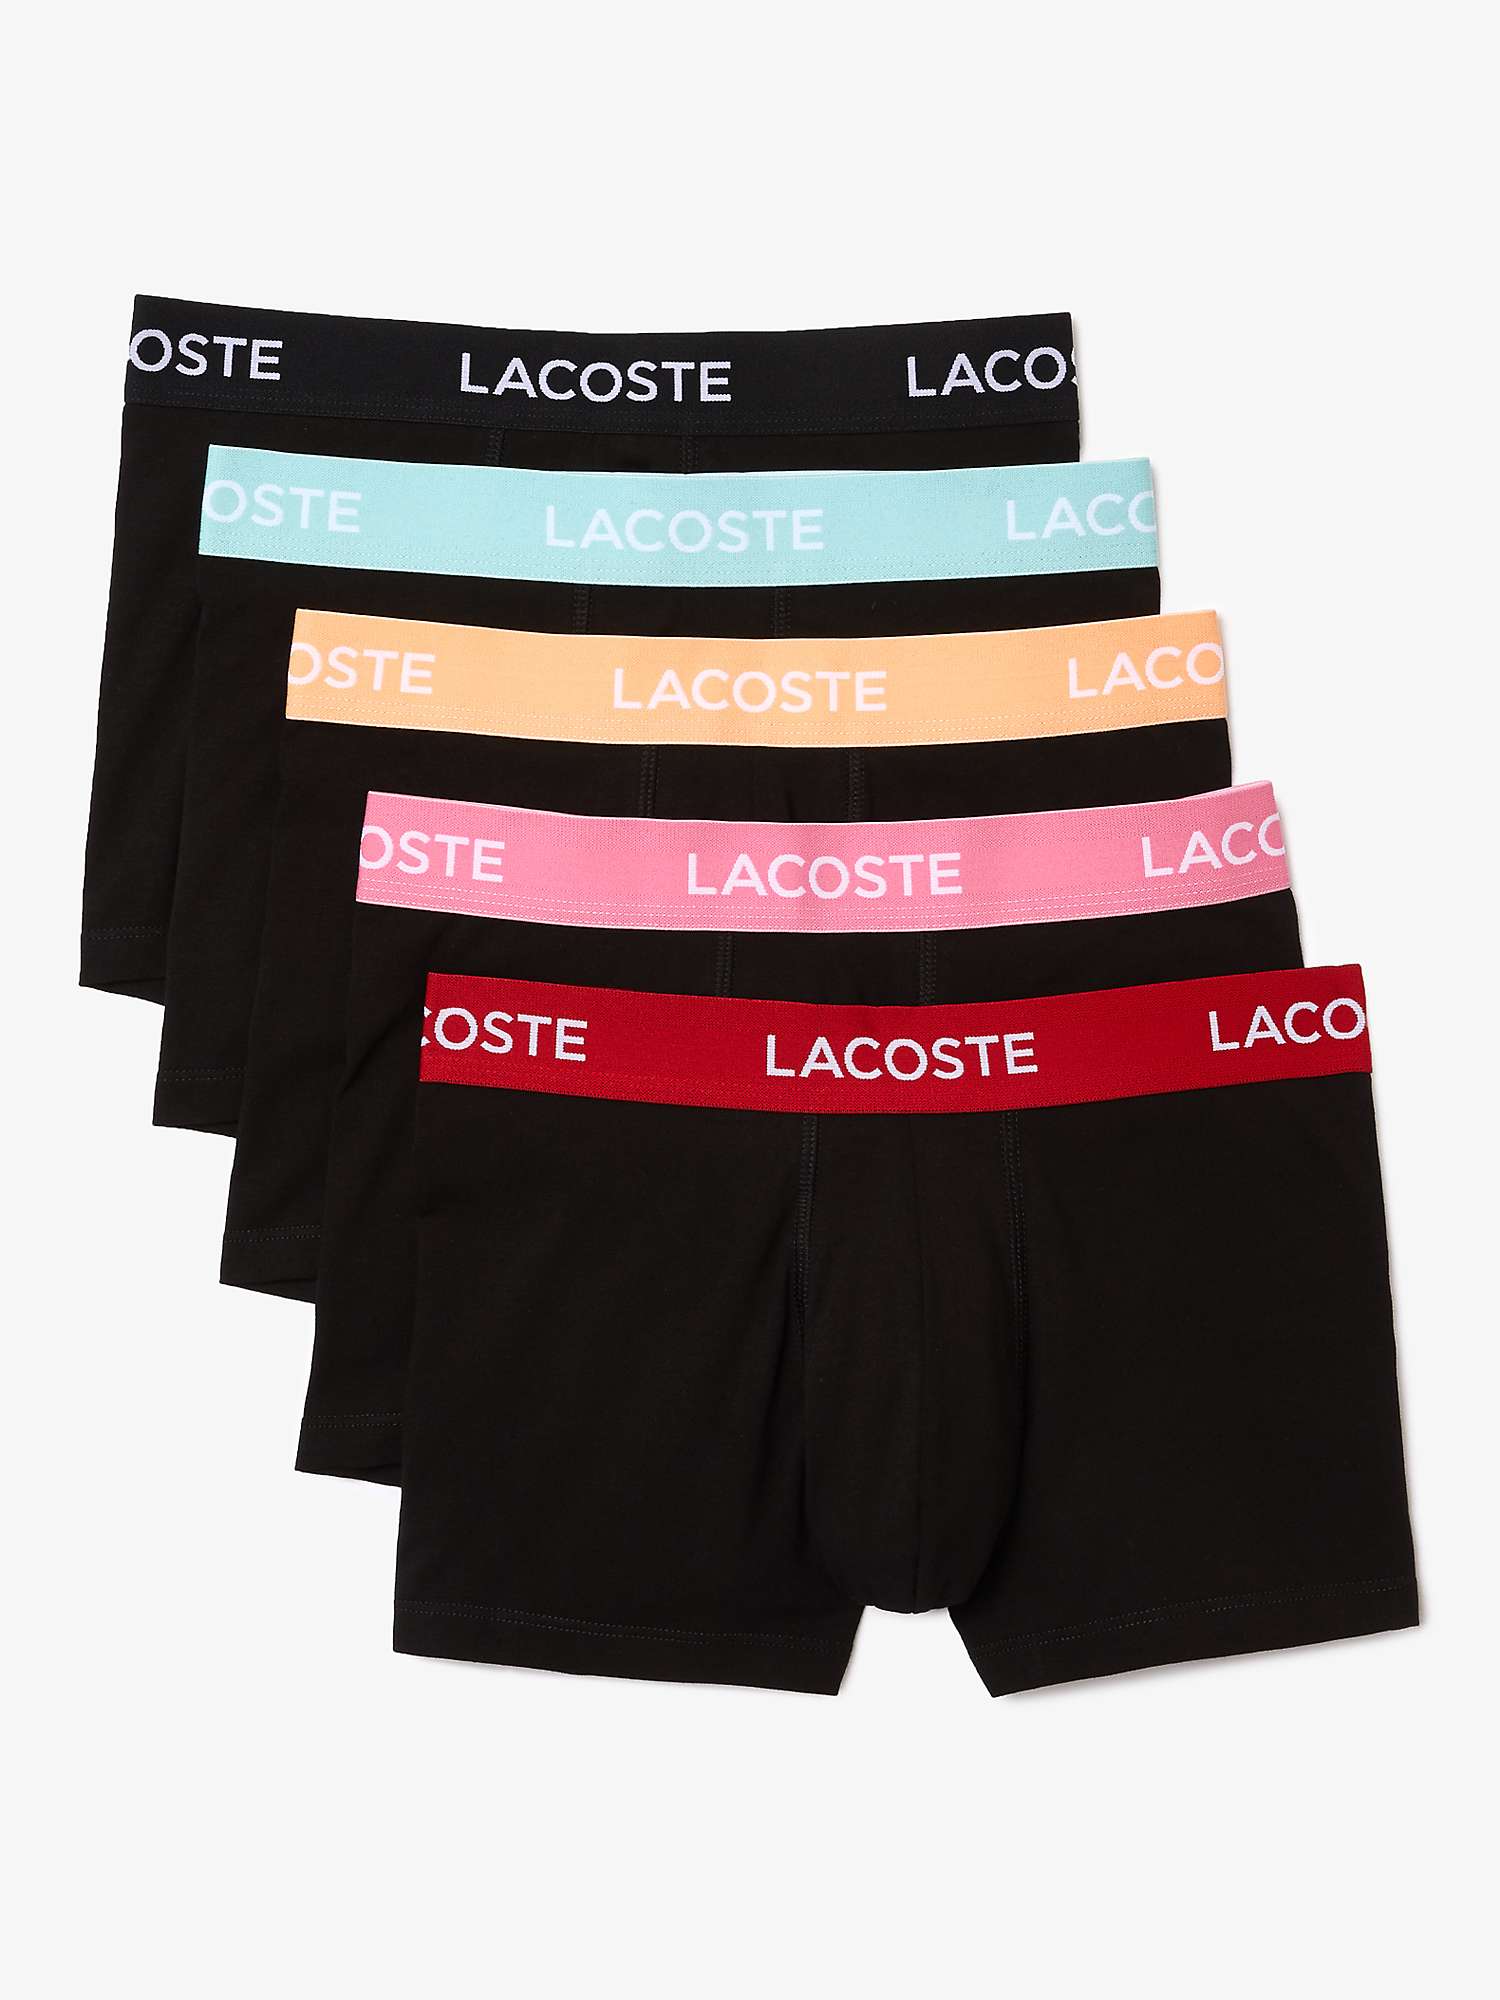 Buy Lacoste Contrast Waistband Trunks, Pack of 5, Black/Multi Online at johnlewis.com